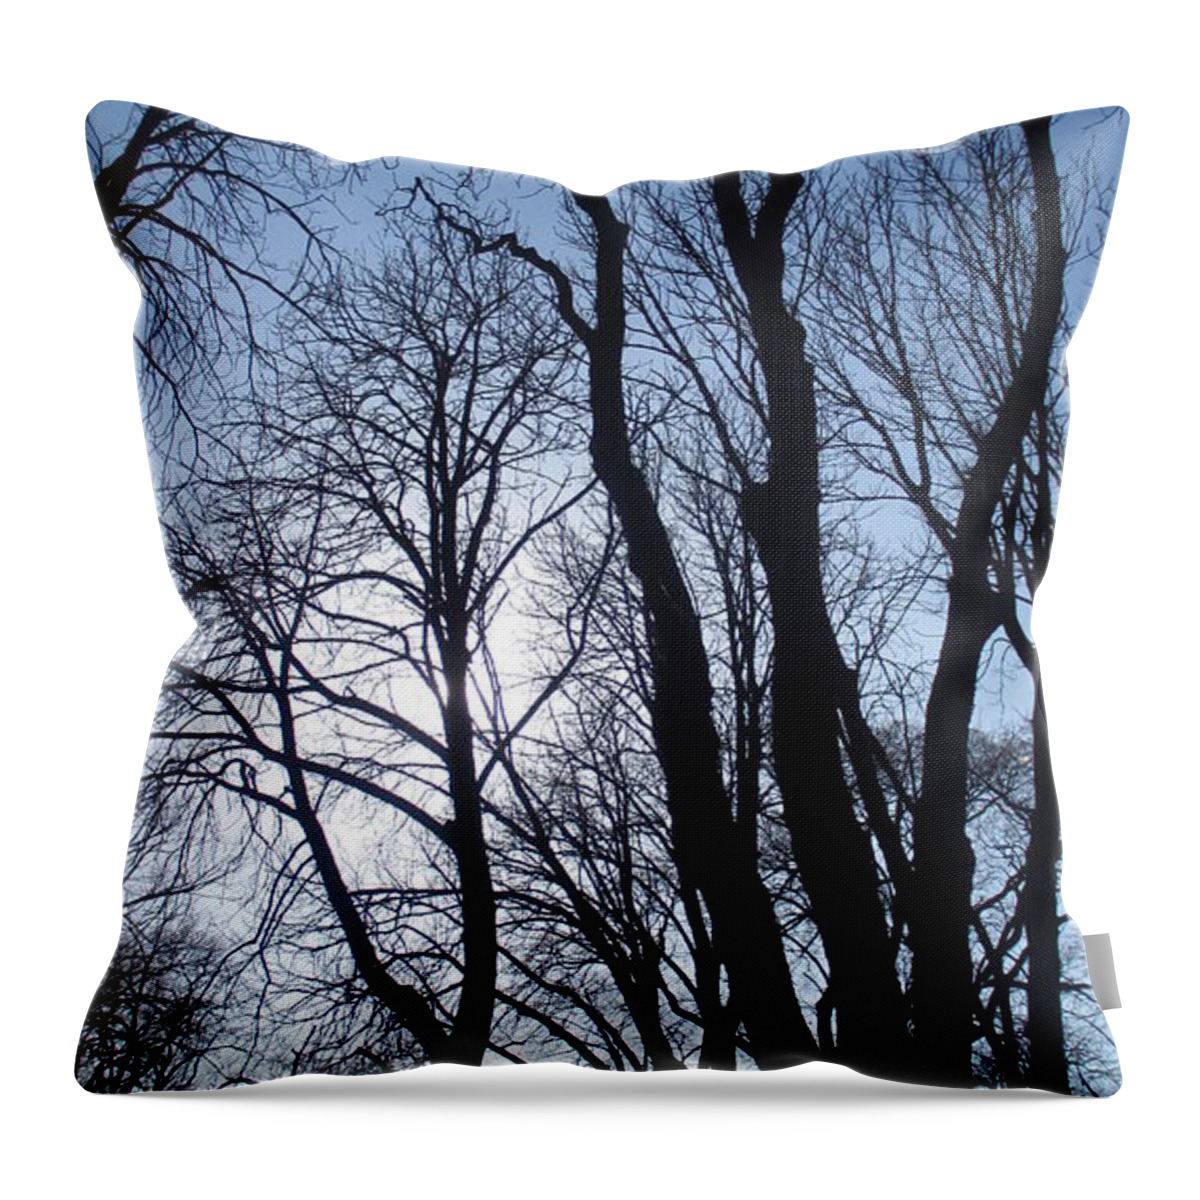 Trees Throw Pillow featuring the photograph Magnificent Trees by Anamarija Marinovic